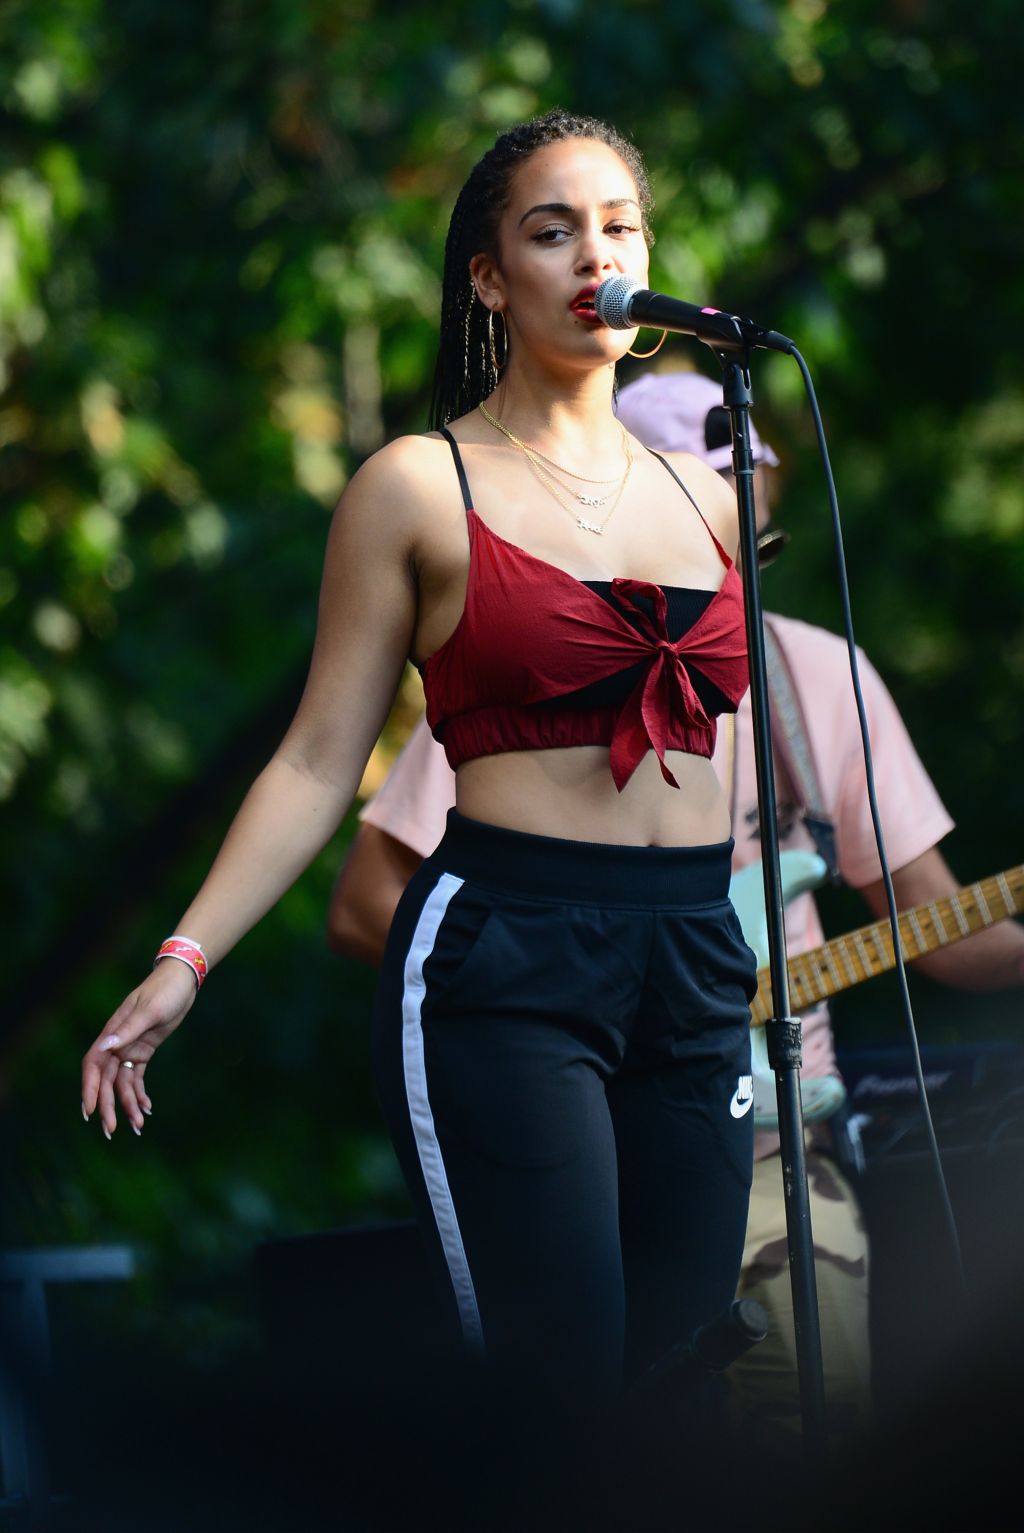 29 Unseen Sexy Photos of Jorja Smith Which Will Make Your Day - PopMellow